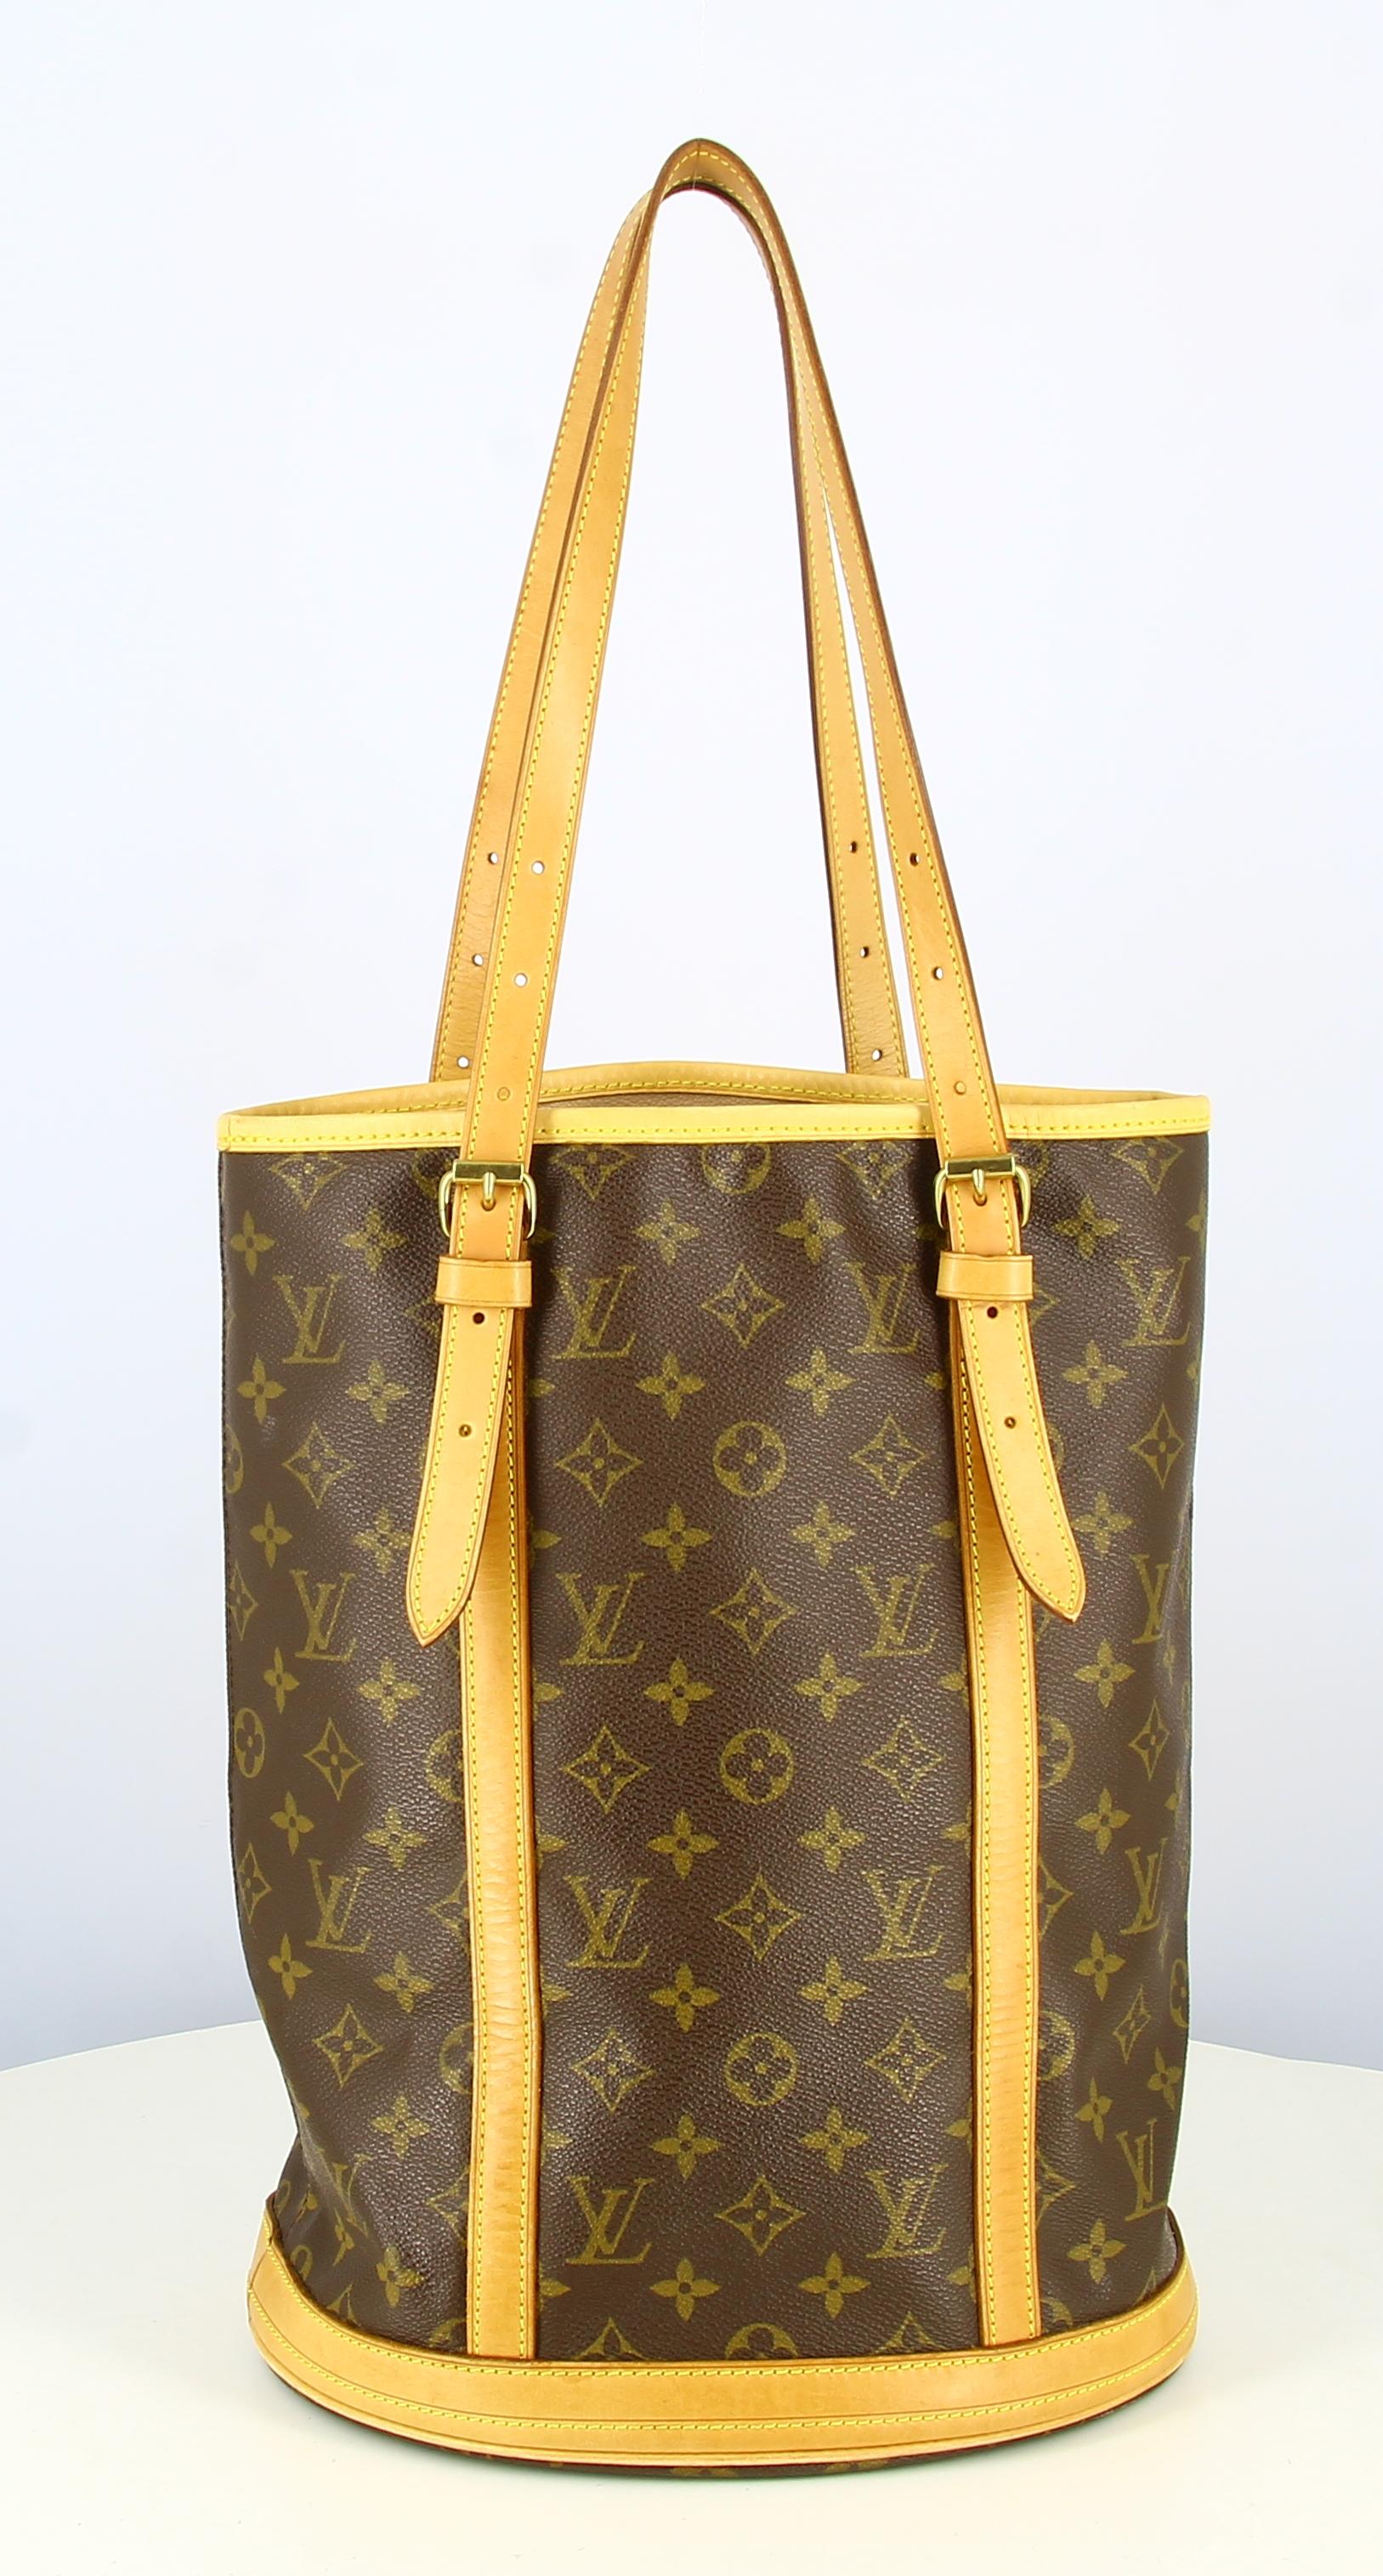 2005 Louis Vuitton Canvas Monogram Handbag 

- Very good condition. shows slight signs of wear over time. 
- Louis Vuitton Handbag 
- Canvas monogram
- Two brown leather straps 
- Inside: zipped pocket
